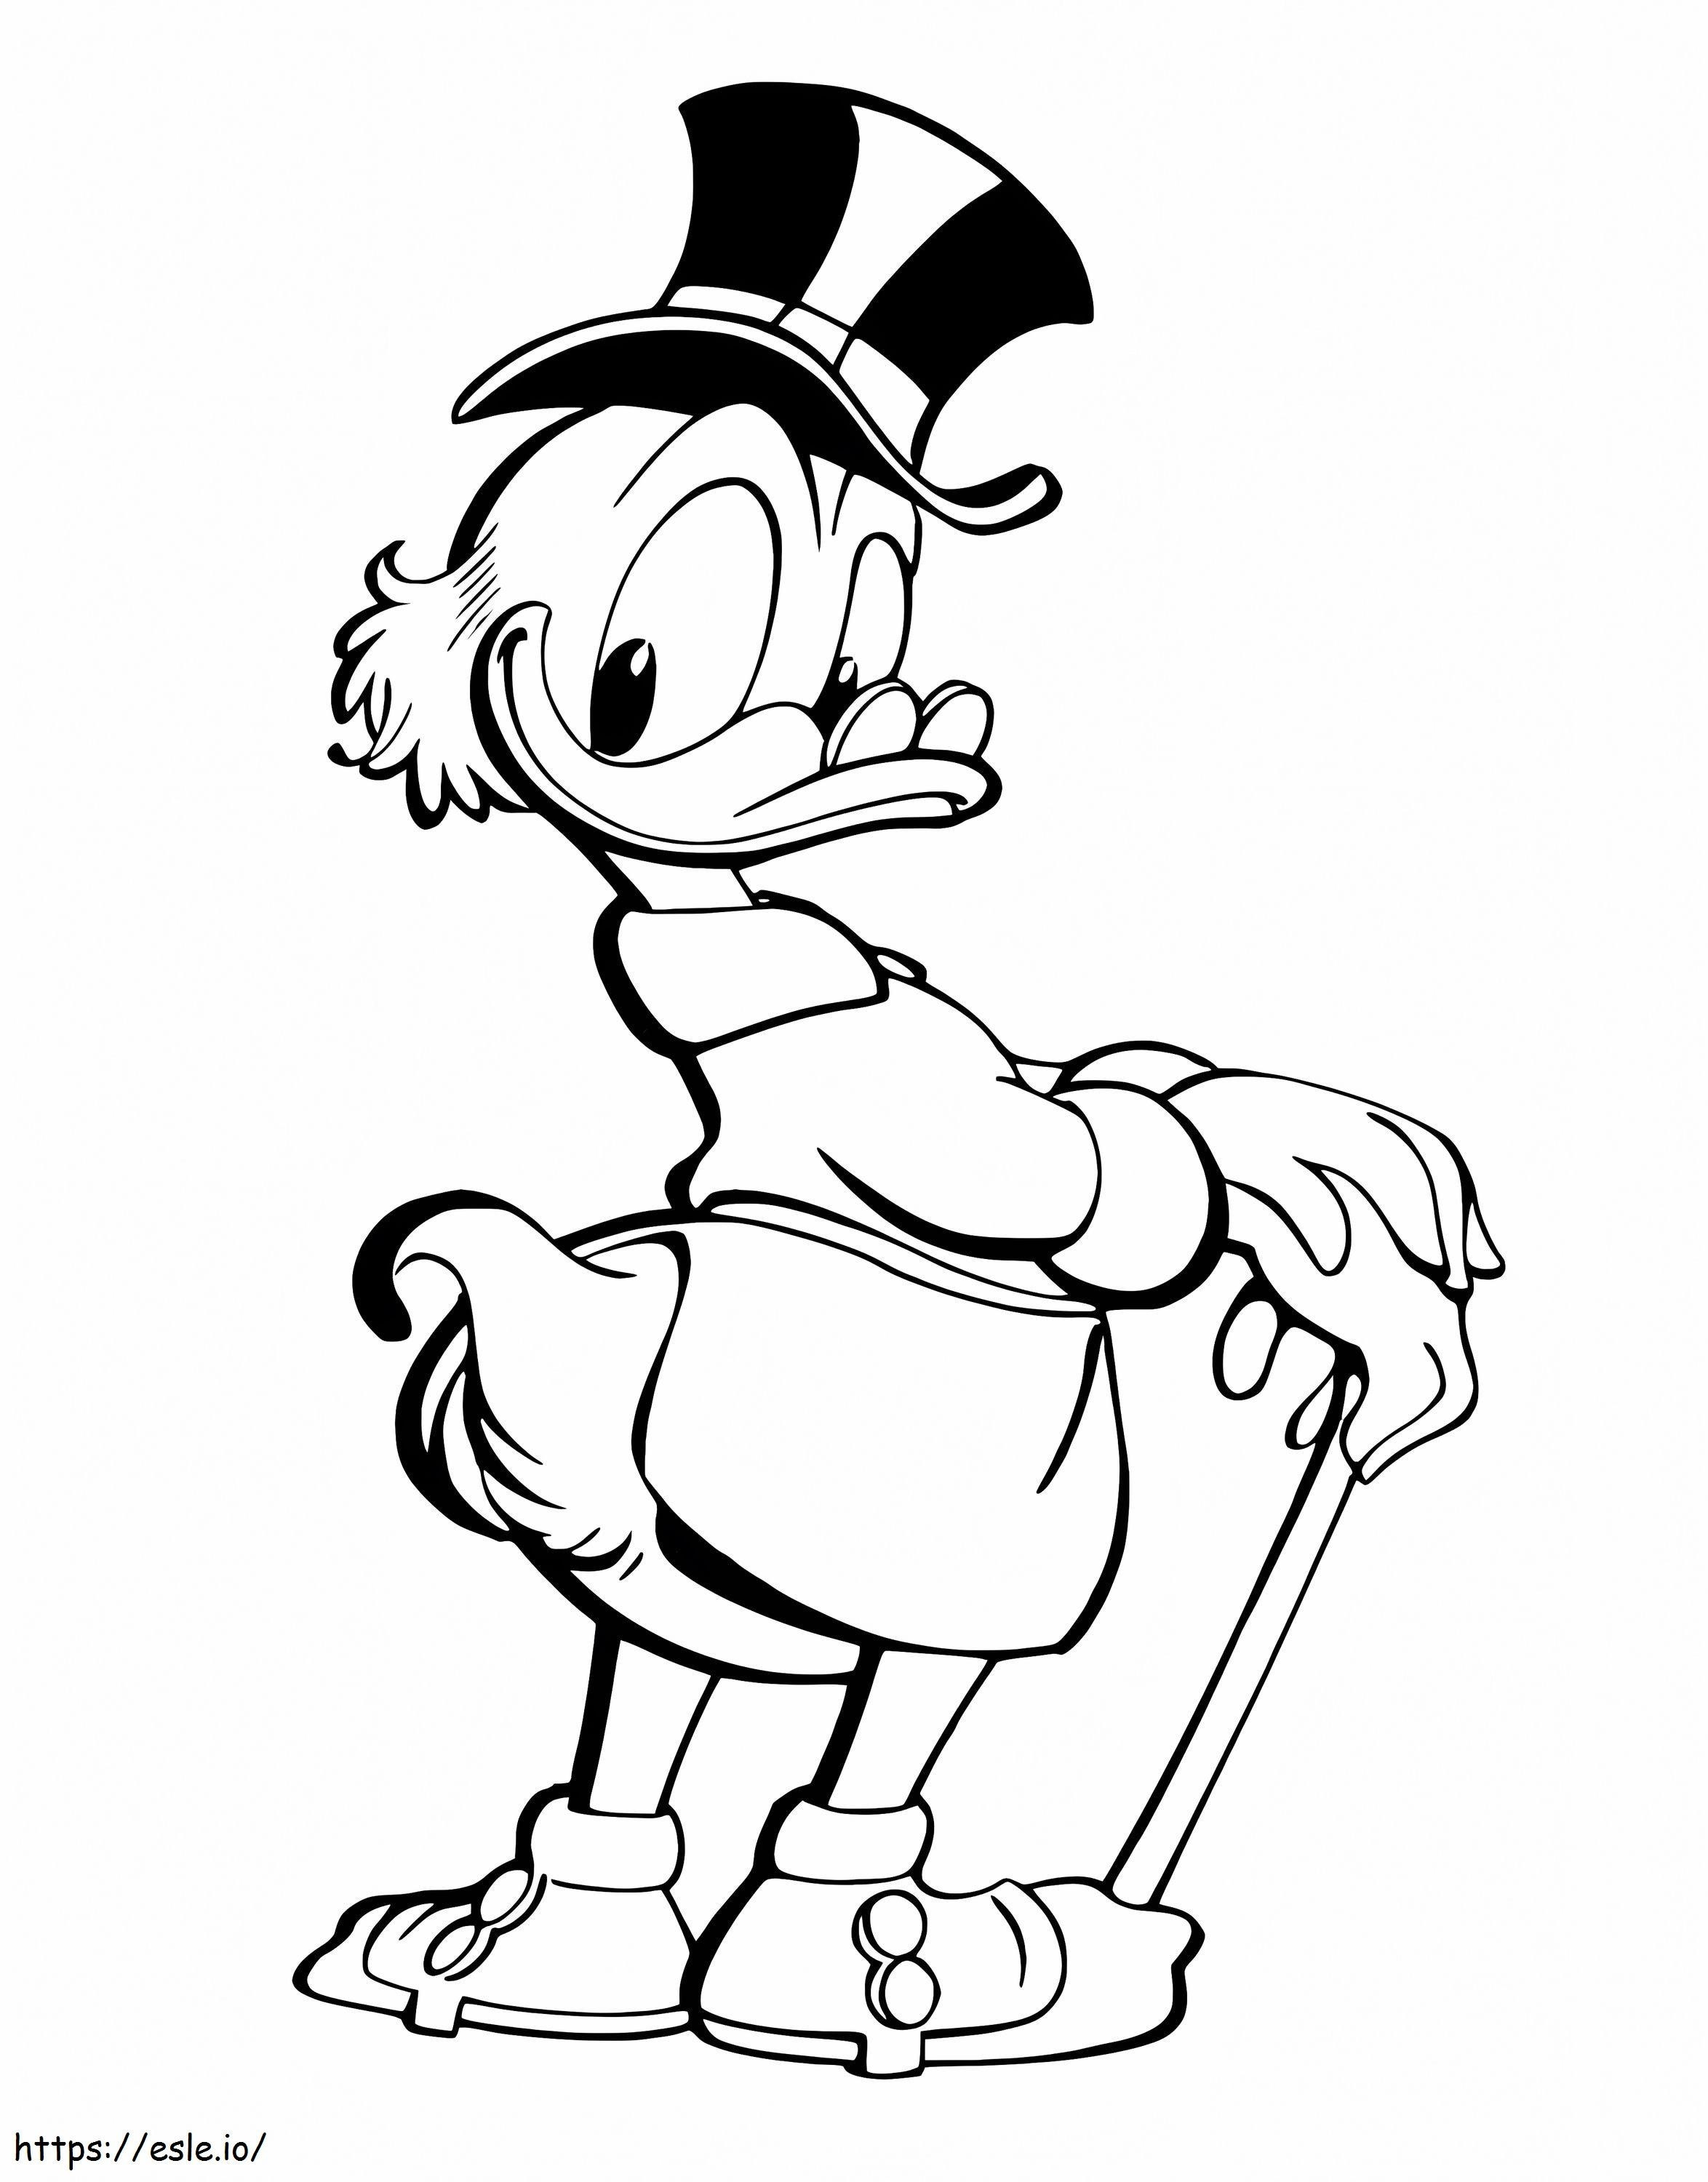 Scrooge McDuck 4 coloring page